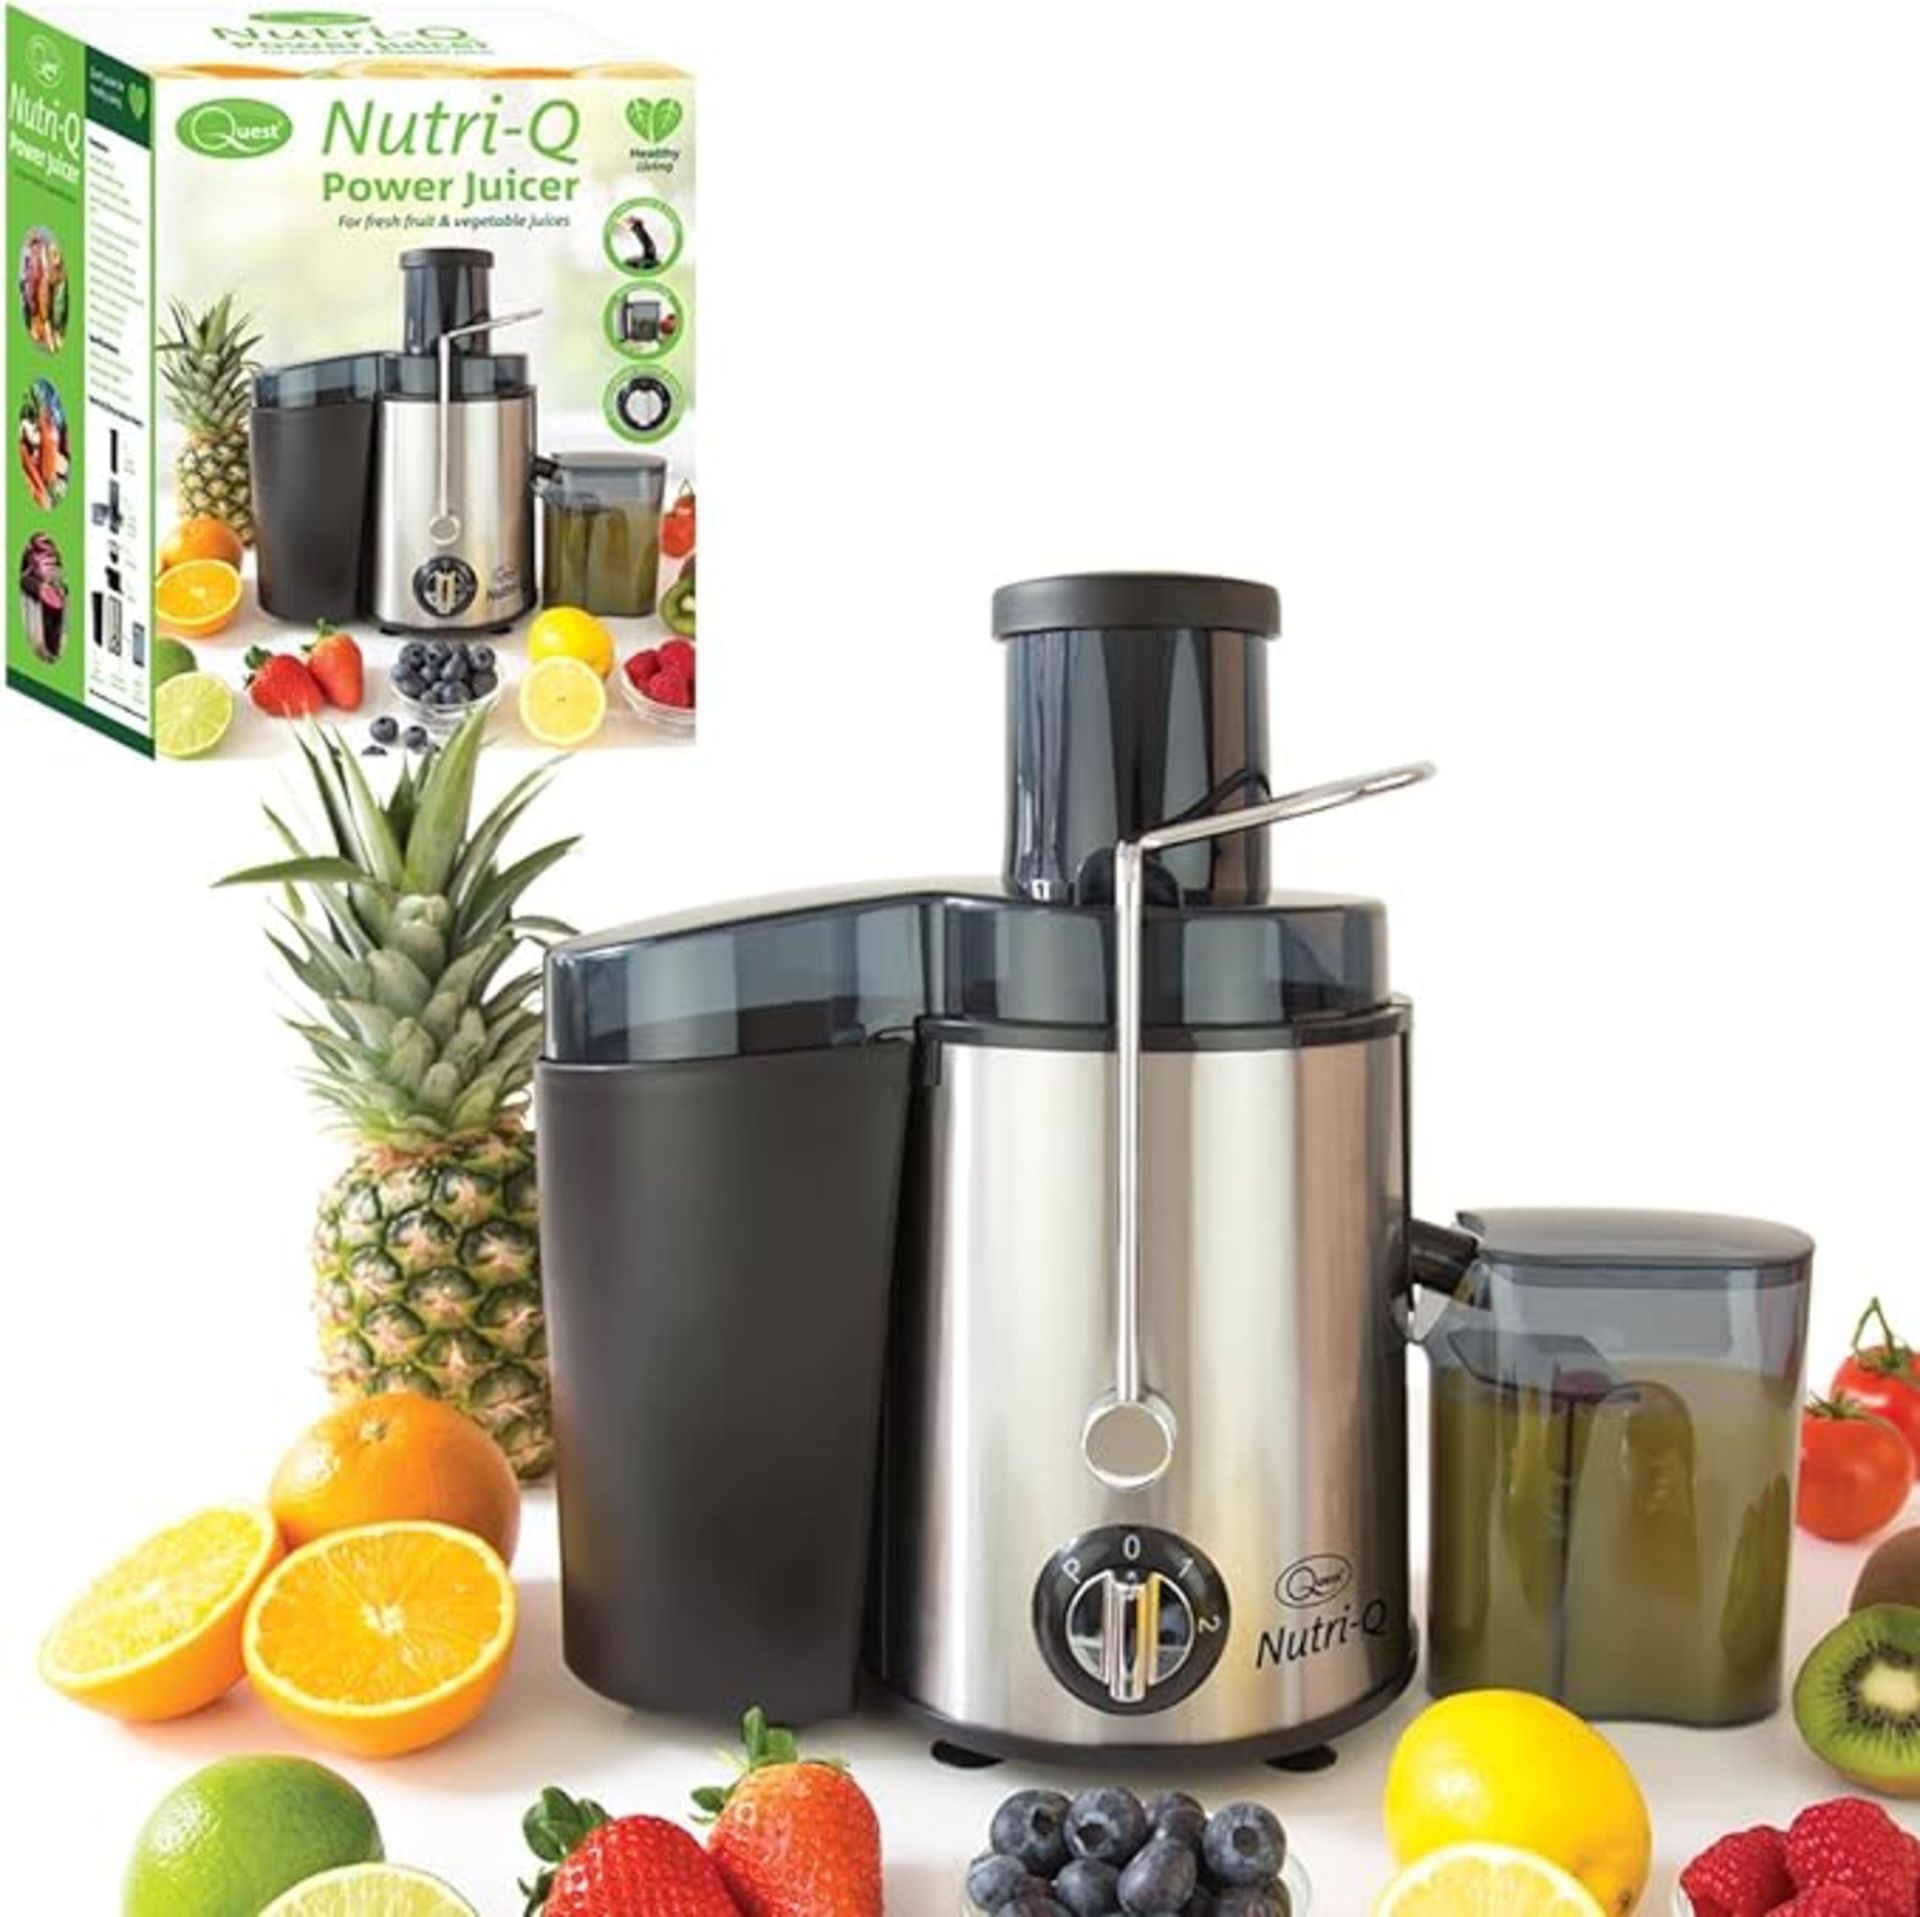 Quest Nutri-Q 34730 Power Juicer With Centrifugal Extractor / 0.5L Jug & 1.5L Pulp Container. -